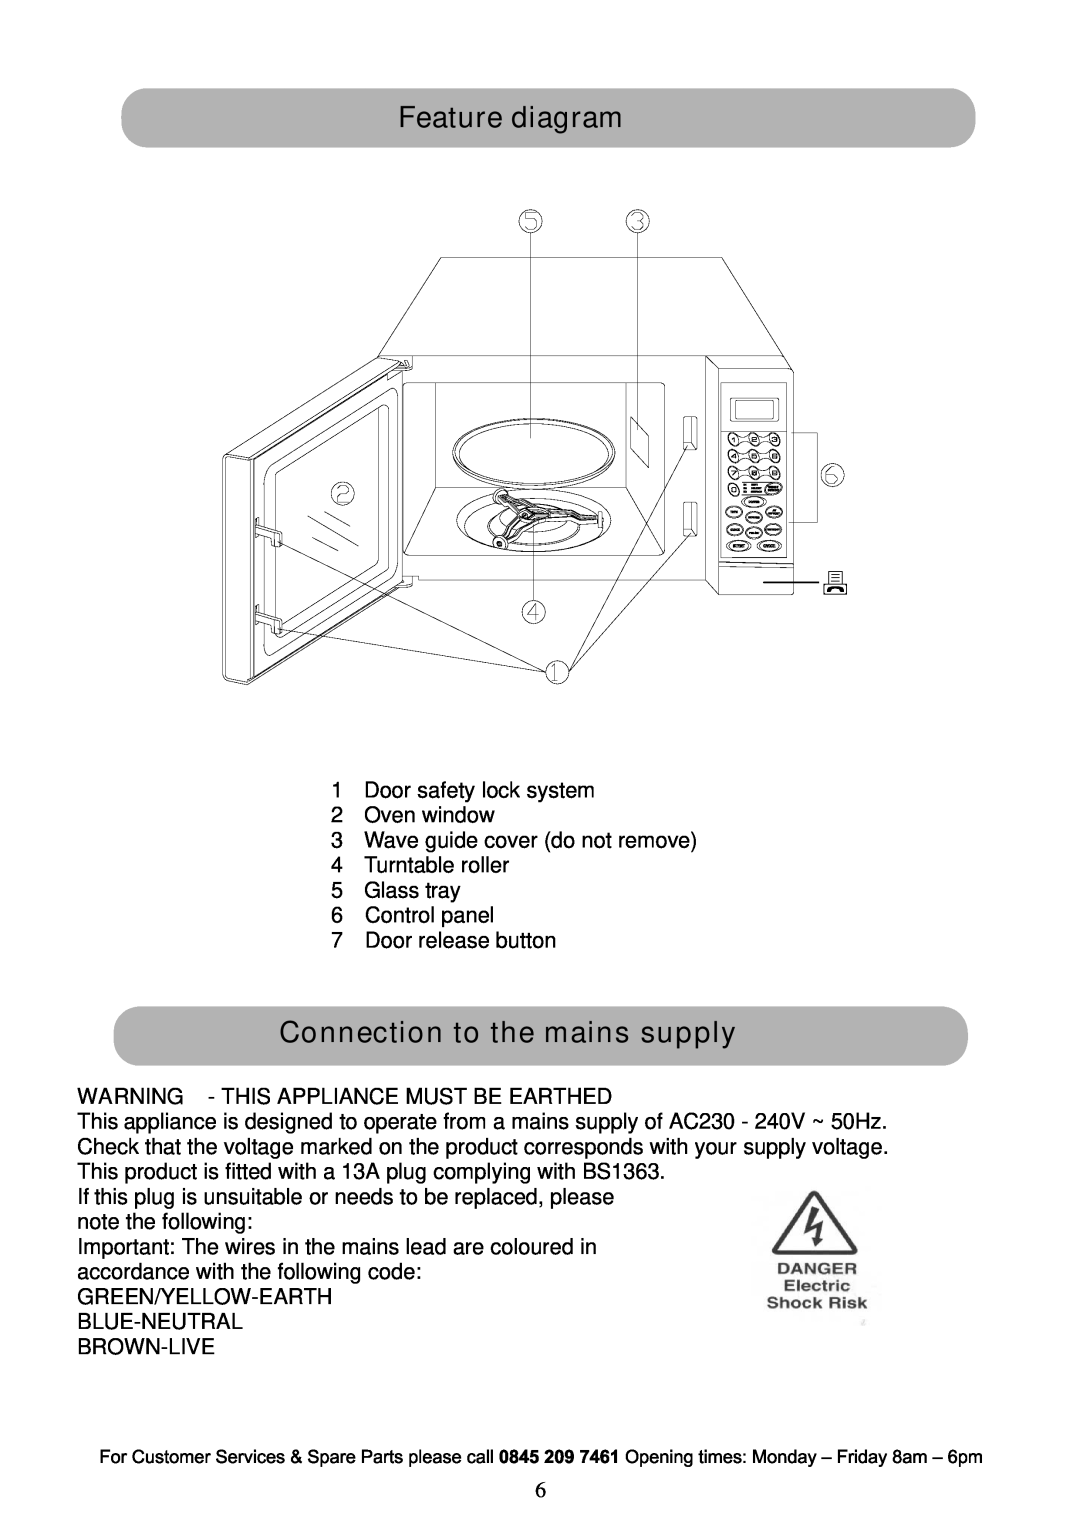 Russell Hobbs RHM1719B manual Feature diagram, Connection to the mains supply 